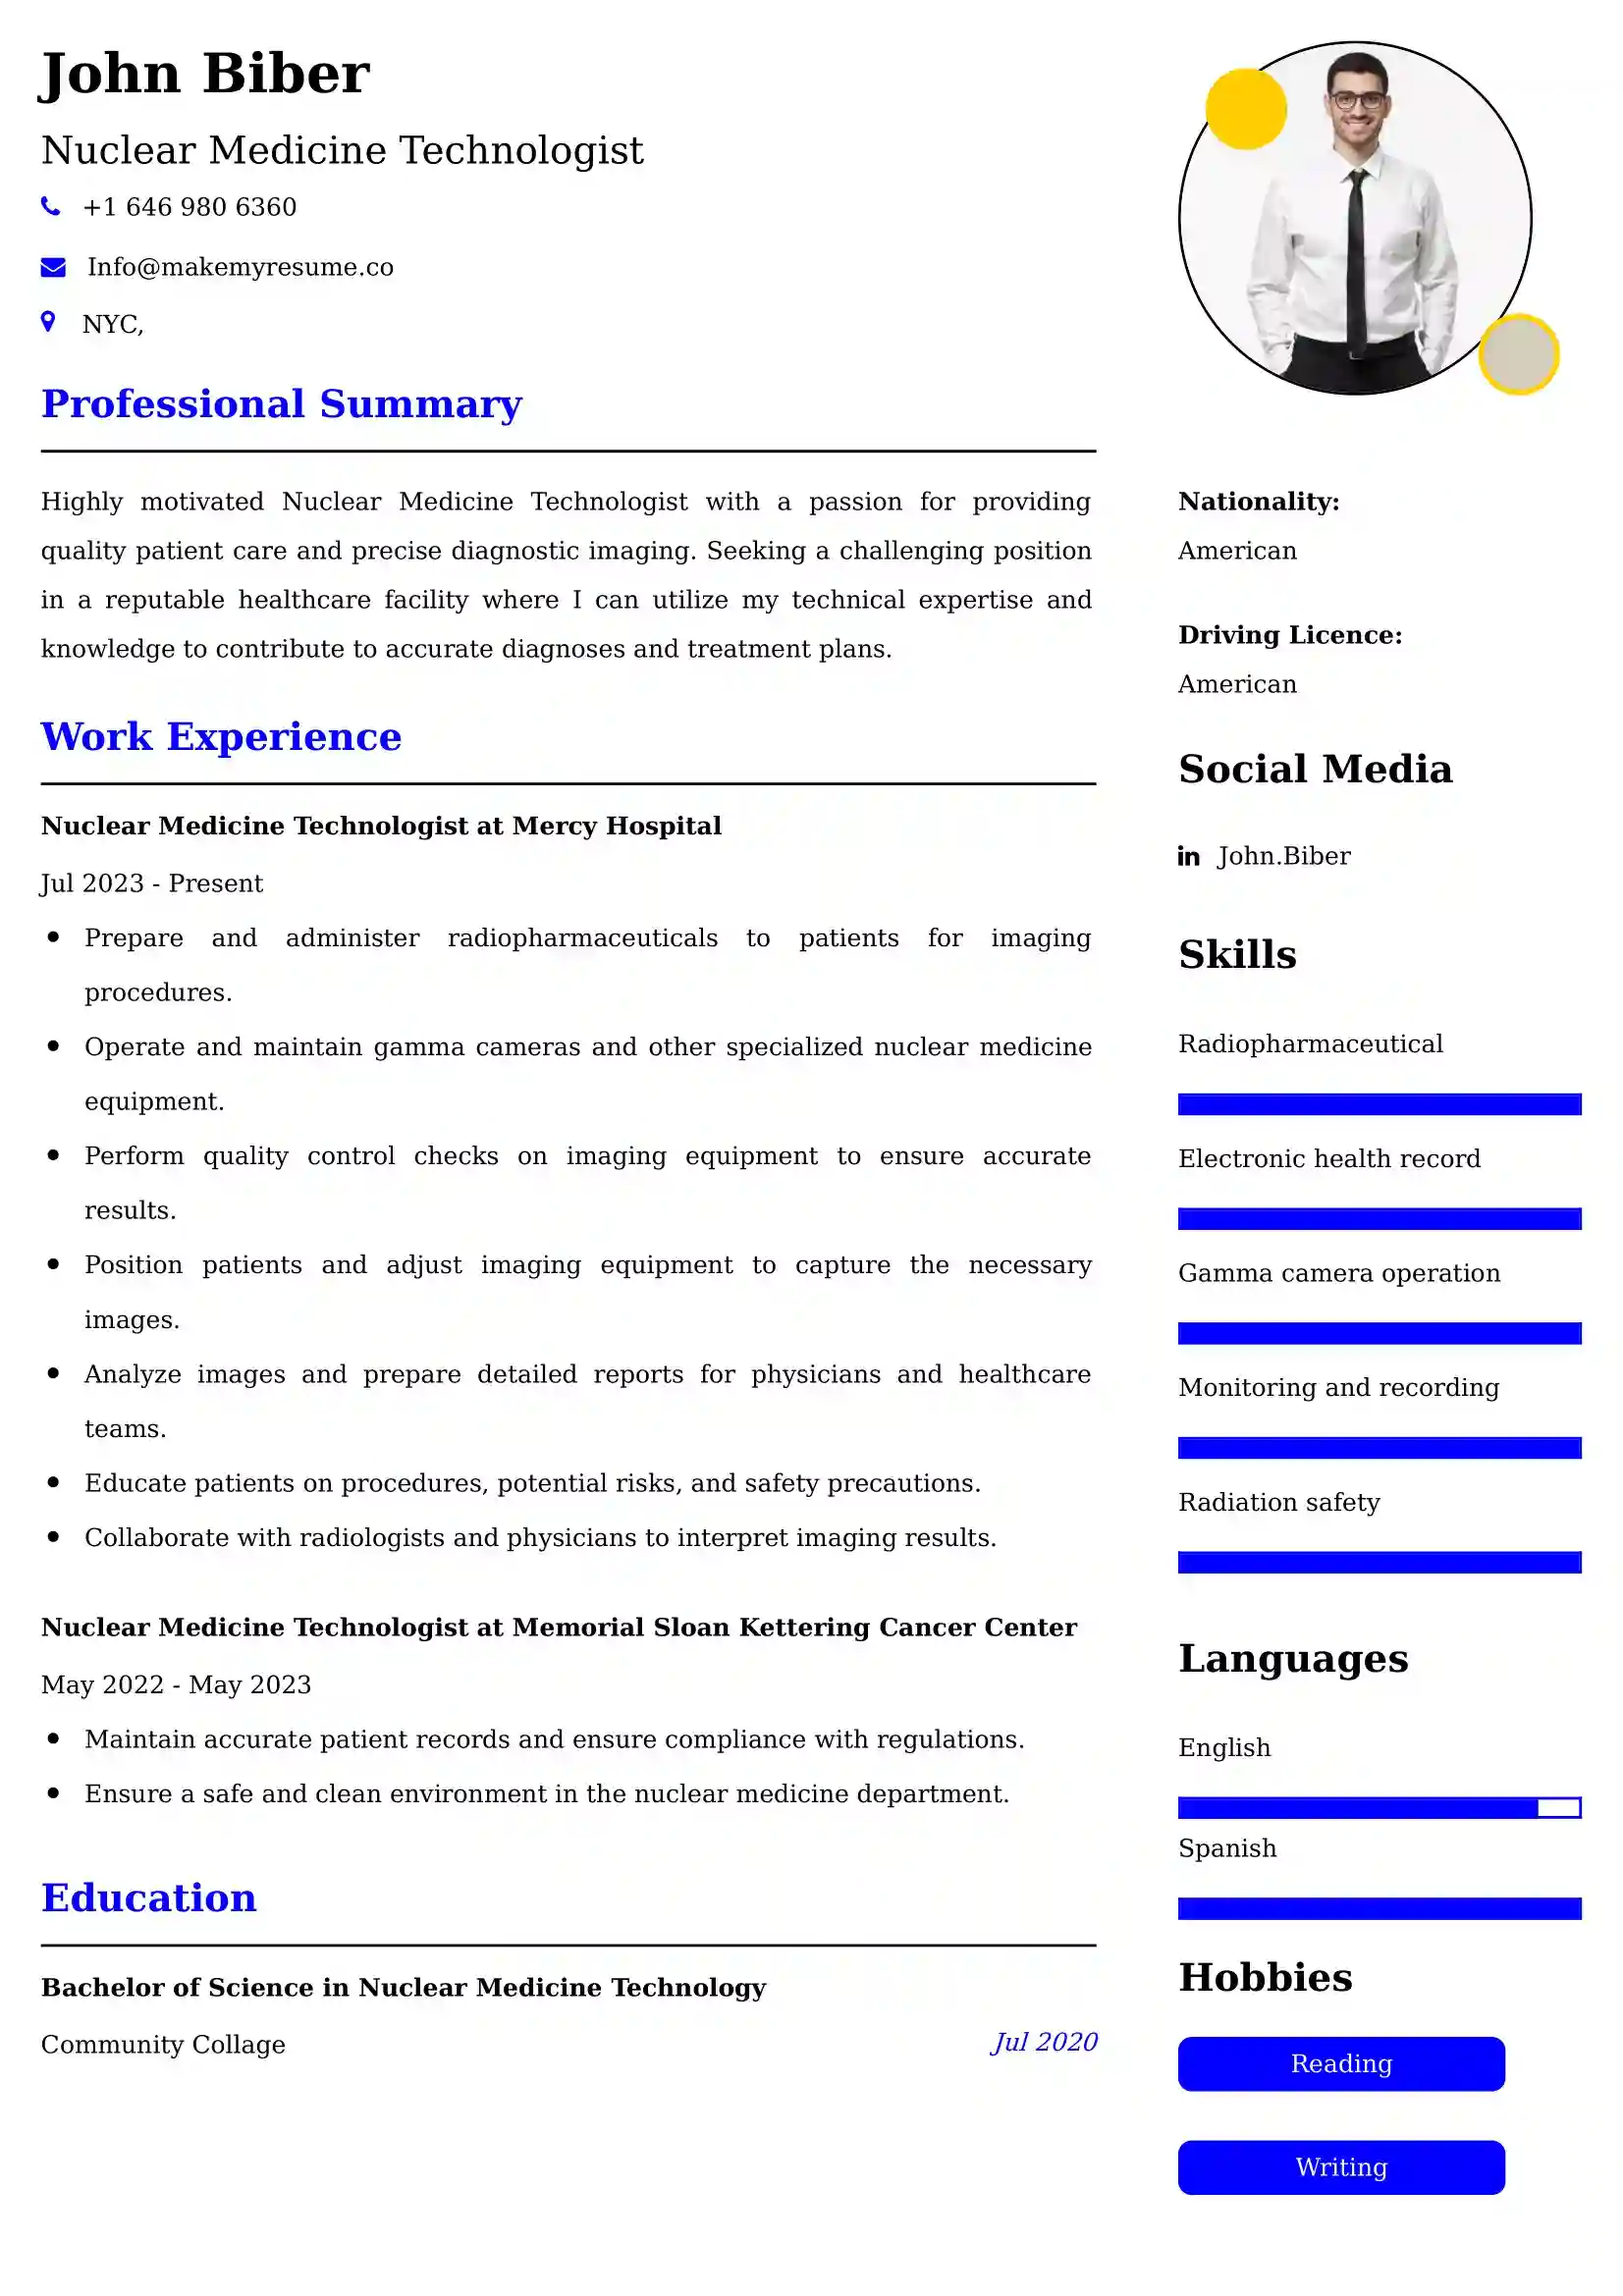 Nuclear Medicine Technologist Resume Examples - Brazilian Format, Latest Template